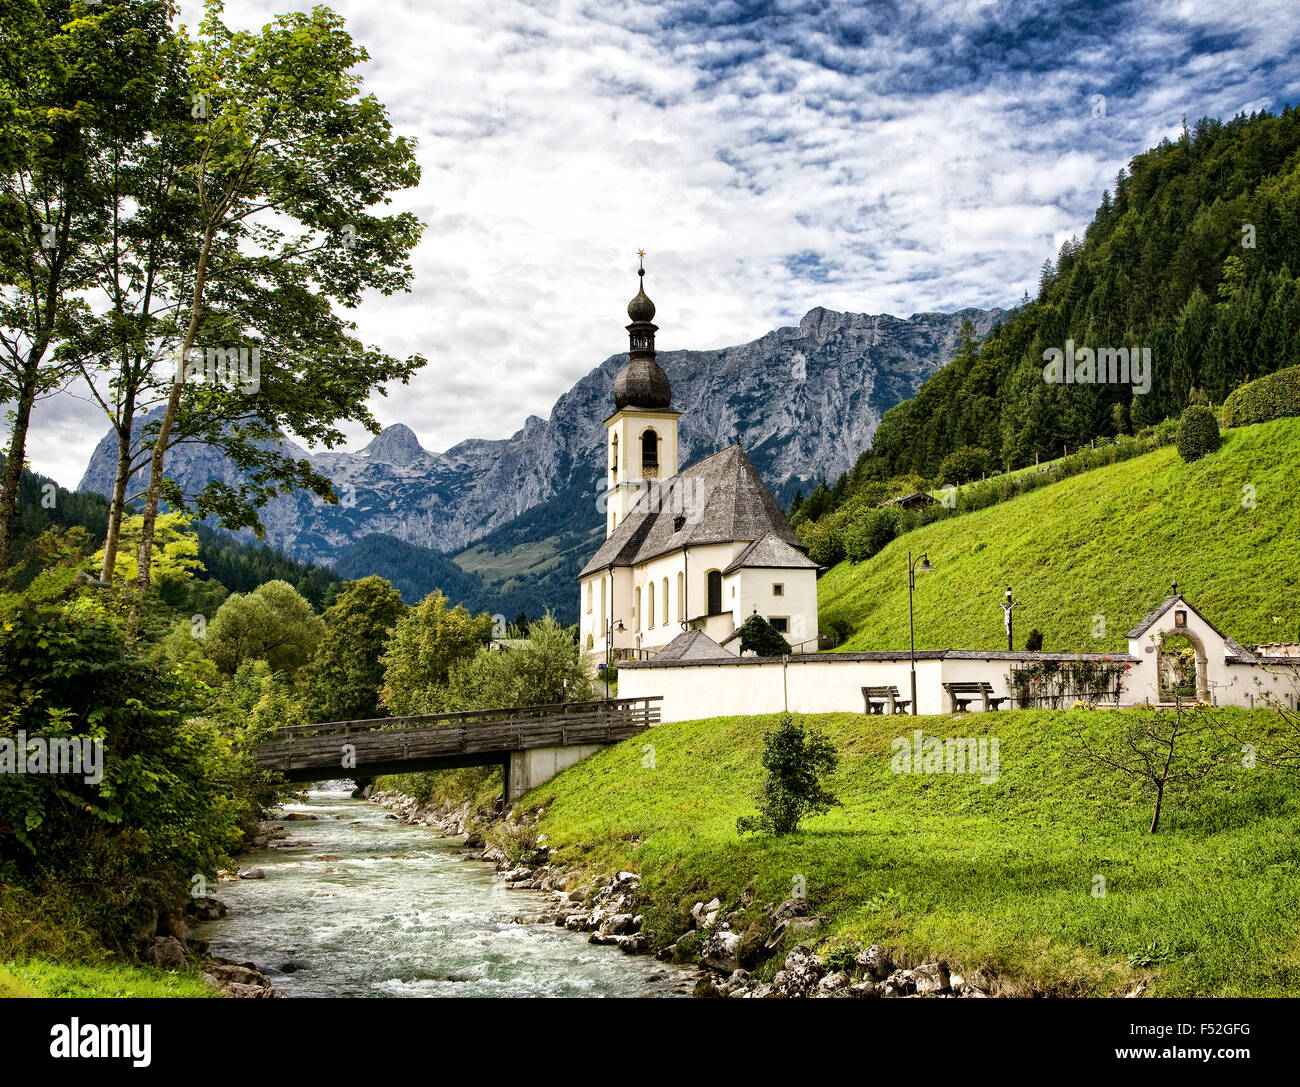 The church of the Village of Ramsau, Germany Stock Photo